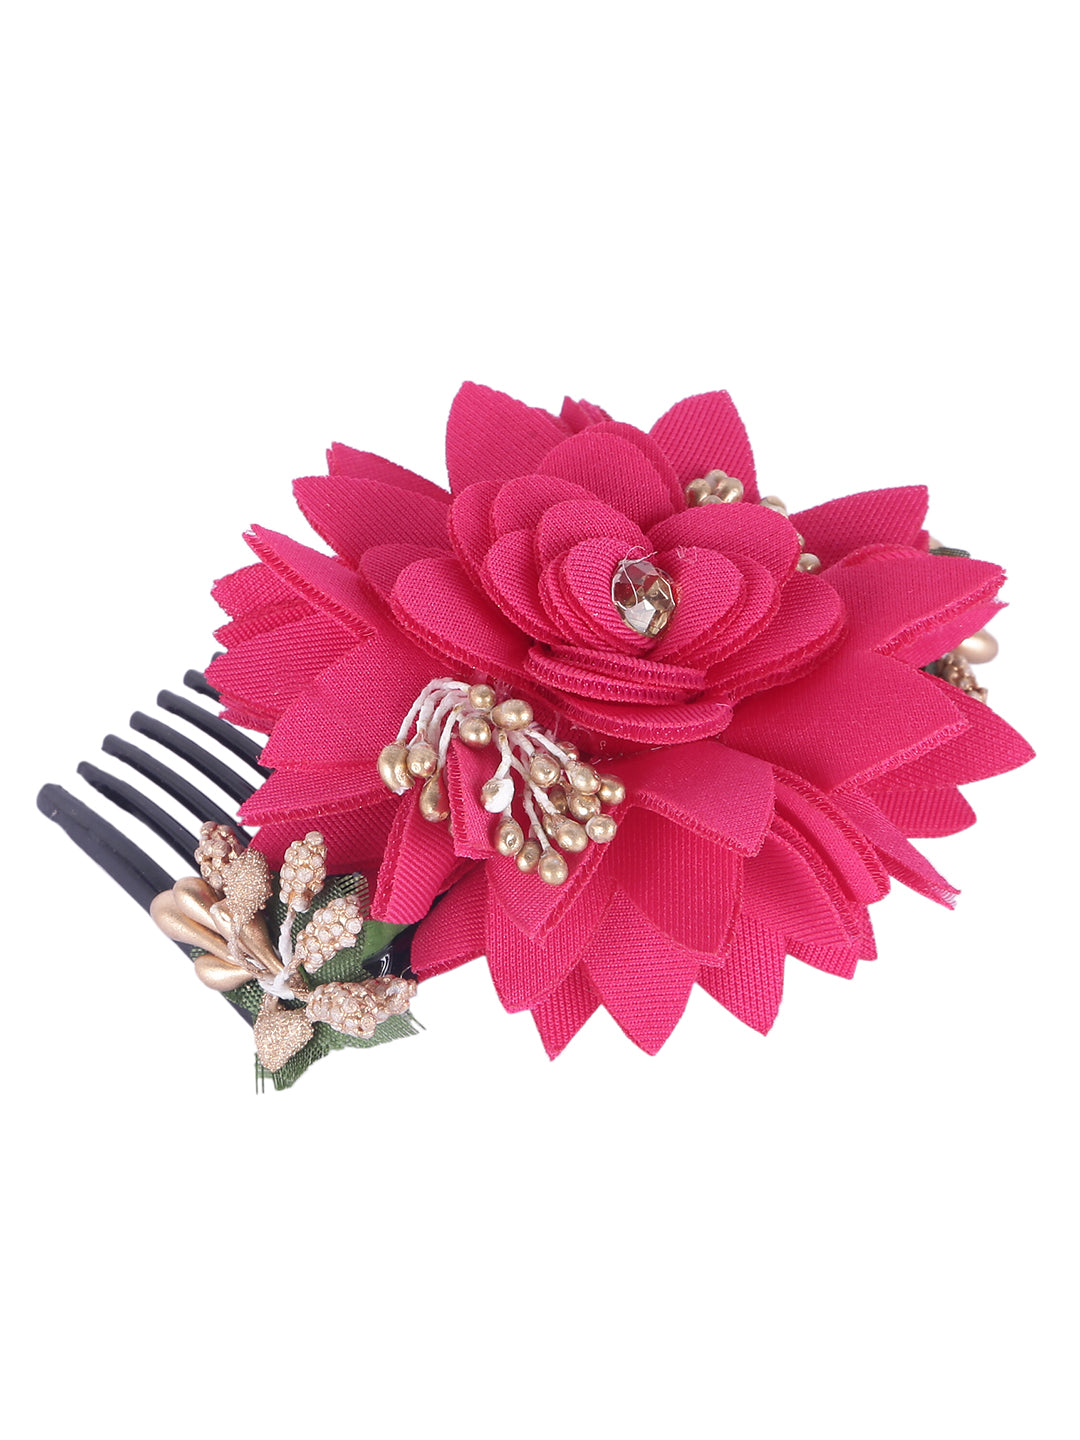 BownBee Flower Hair Accessory- Pink